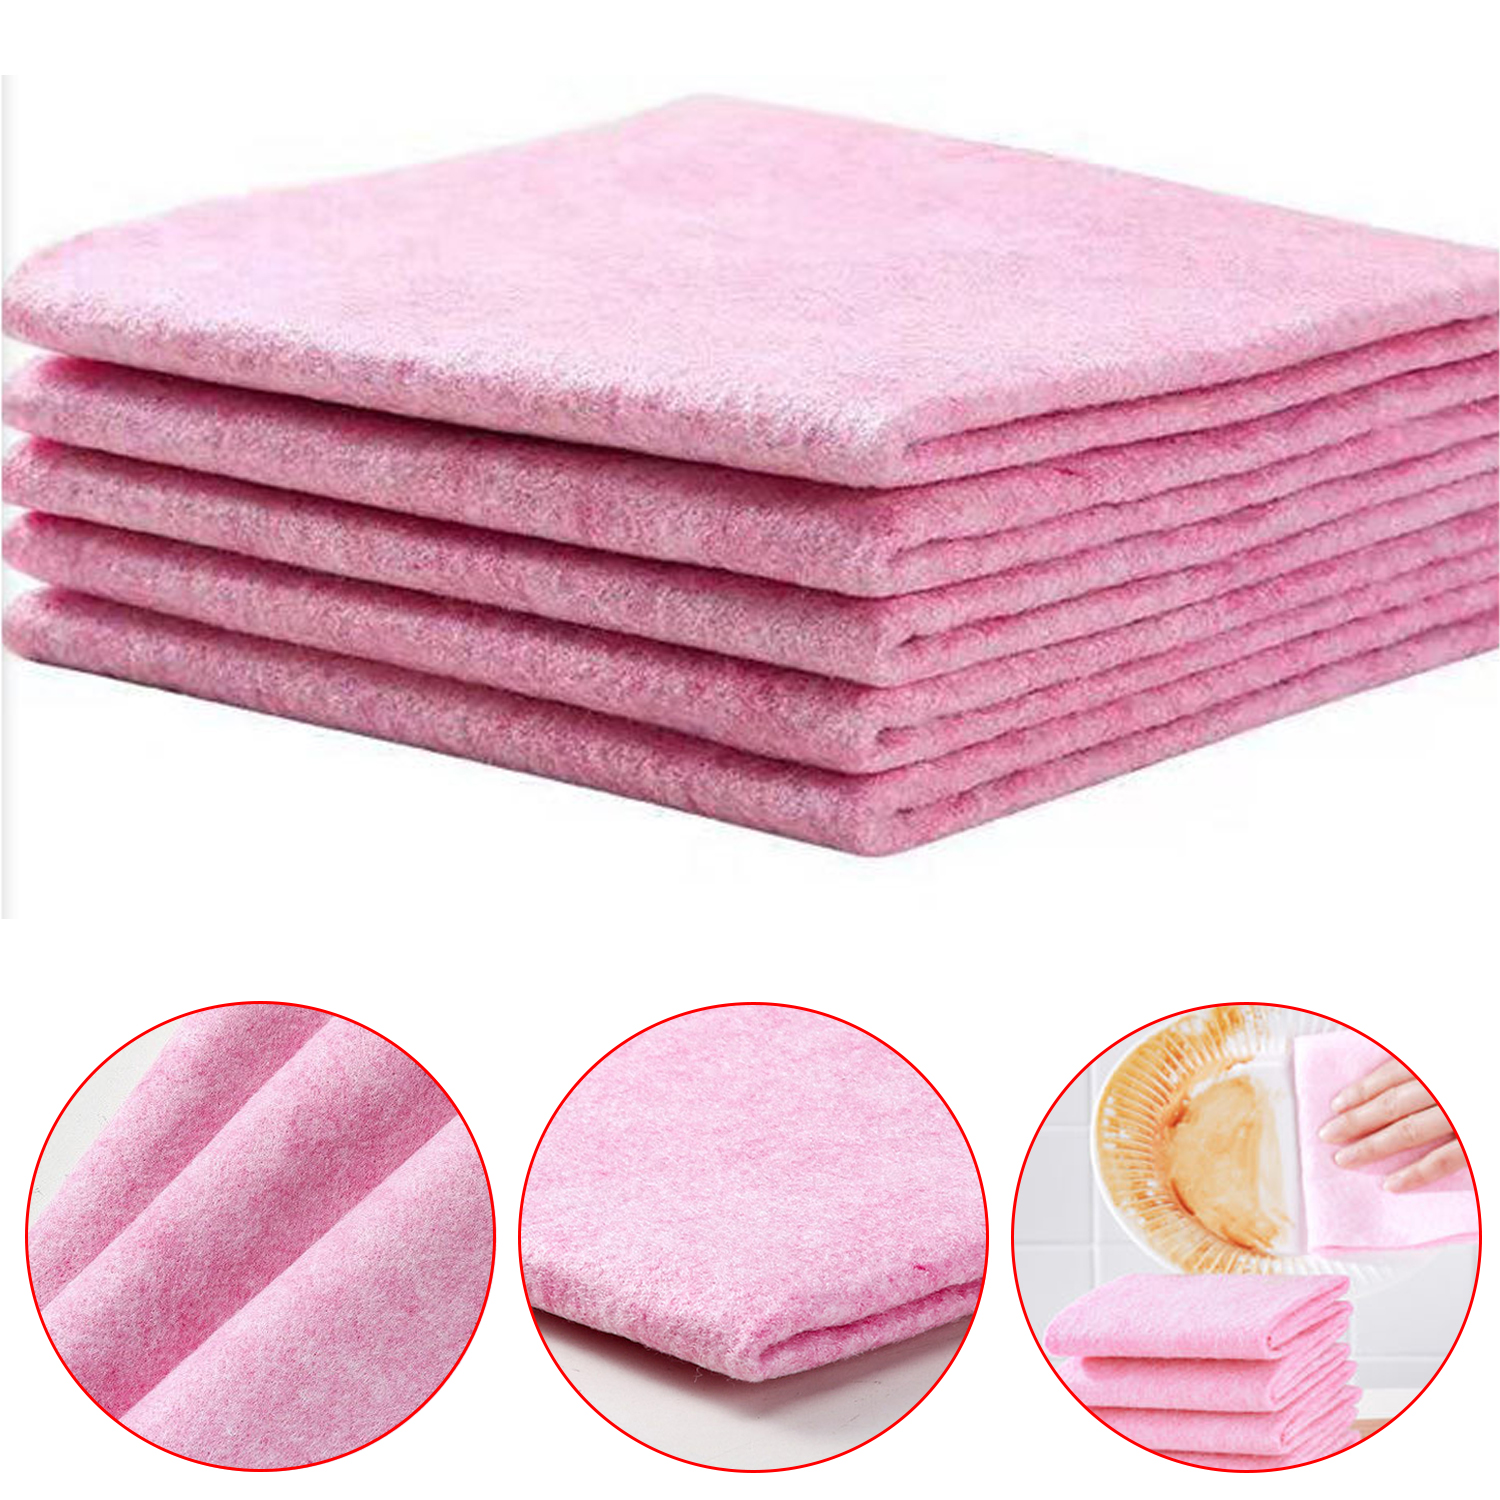 Sponge Cleaning Cloths Biodegradable Dish Cloth Eco Friendly Dishcloth Cellulose Sponge Cloths Cleaning Cloths